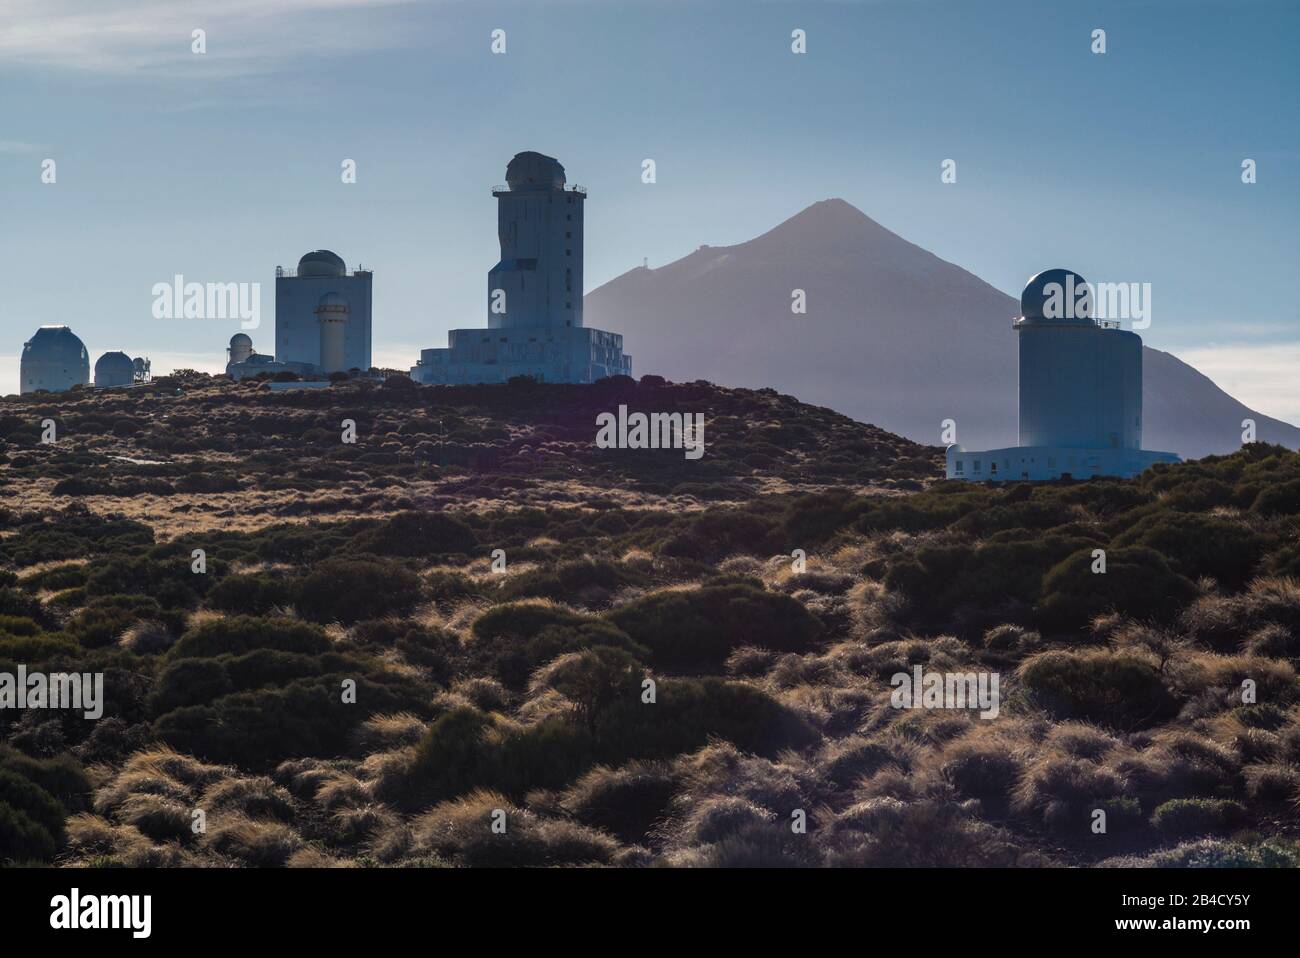 Spain, Canary Islands, Tenerife Island, El Teide Mountain, Observatorio del Teide, astronomical observatory, late afternoon Stock Photo